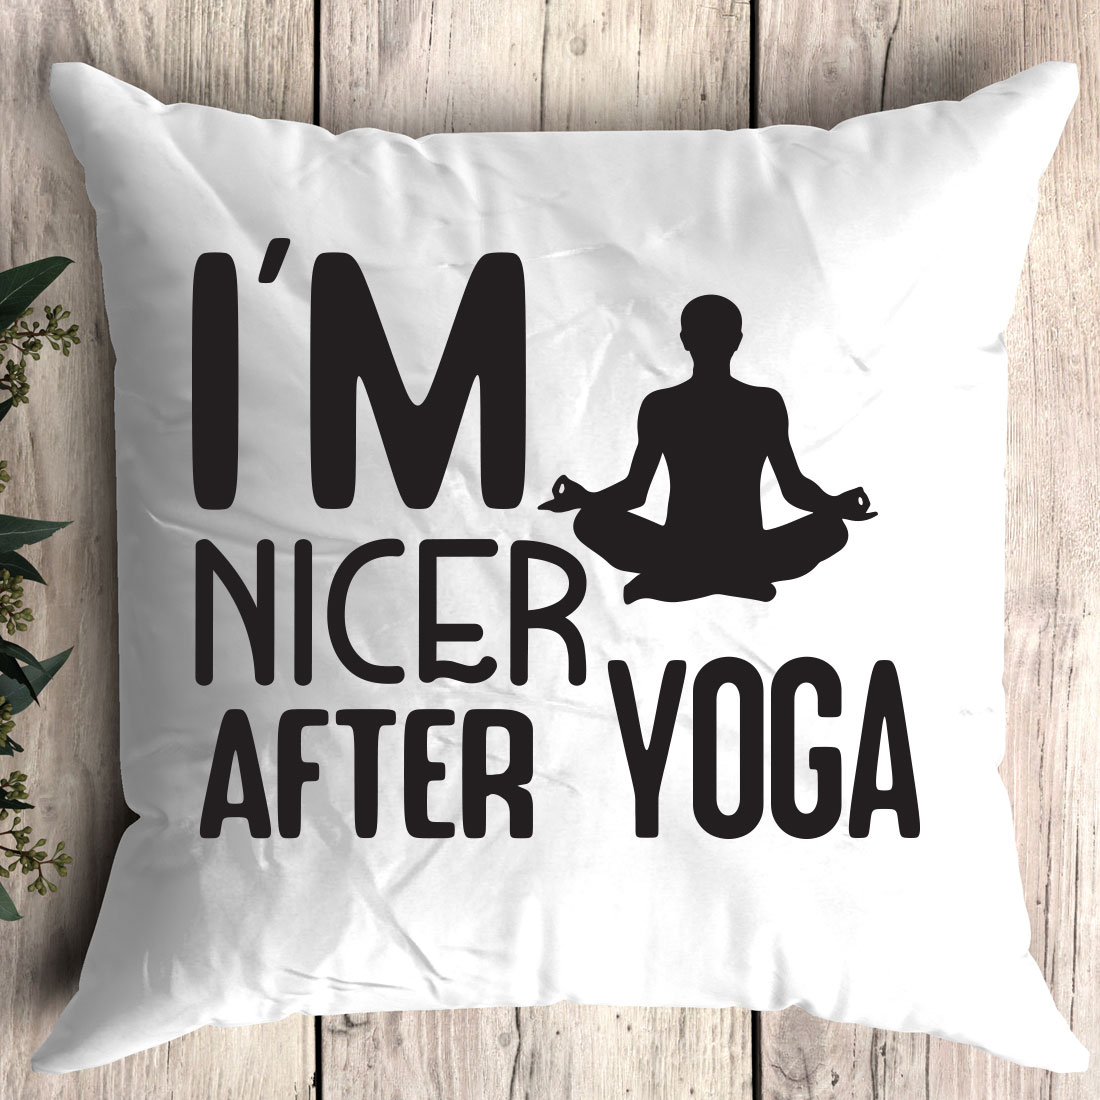 Pillow that says i'm nicer after yoga.